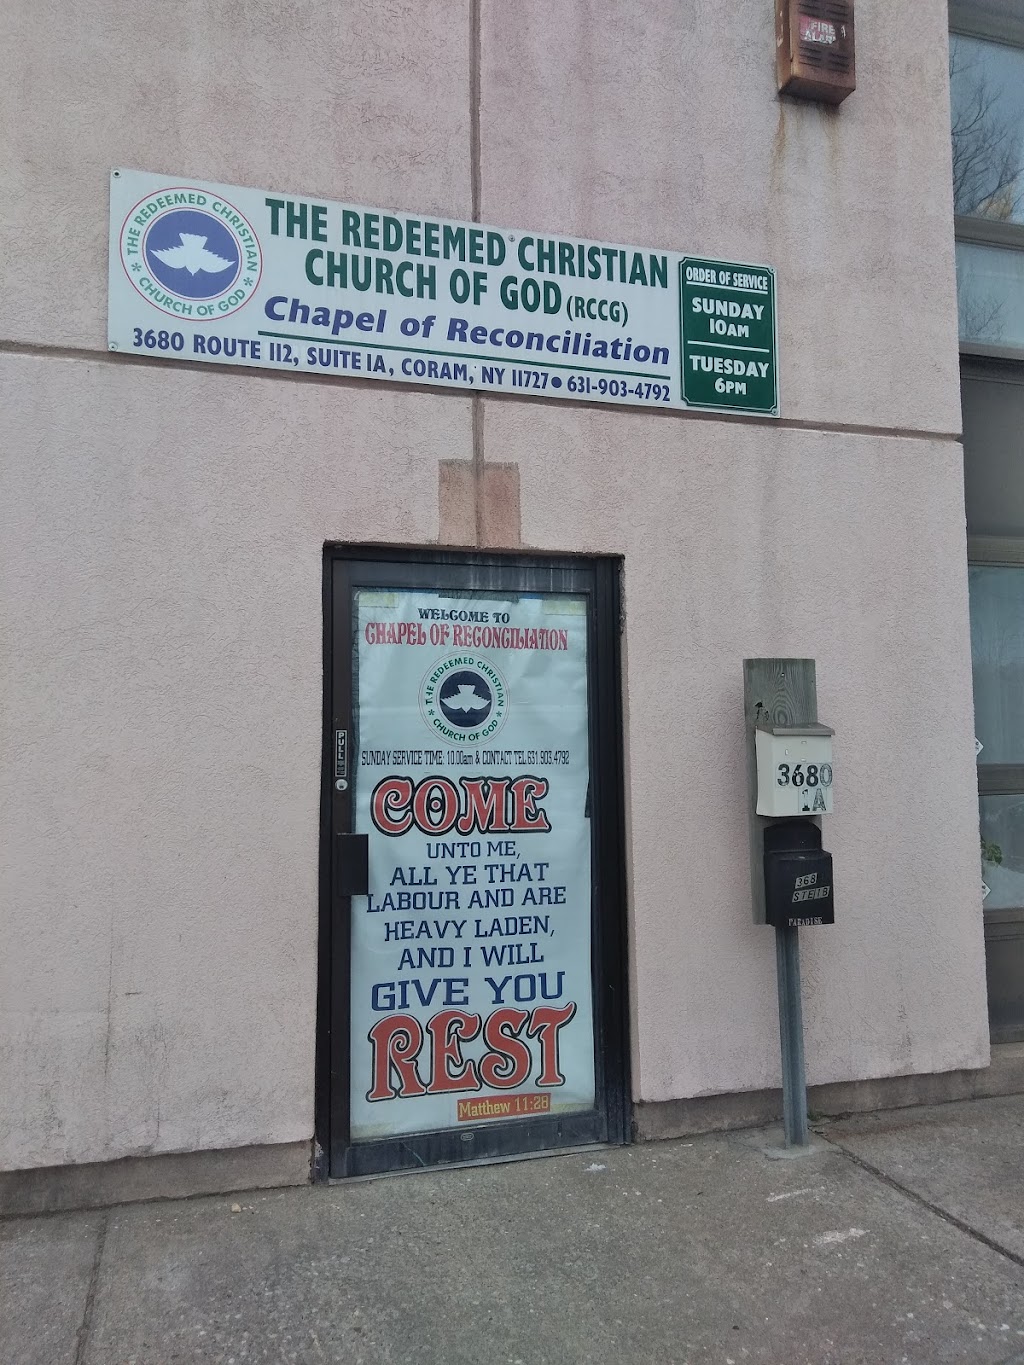 Redeemed Christian Church of God. Chapel of Reconciliation | 821 Hawkins Ave, Lake Grove, NY 11755 | Phone: (631) 903-4792